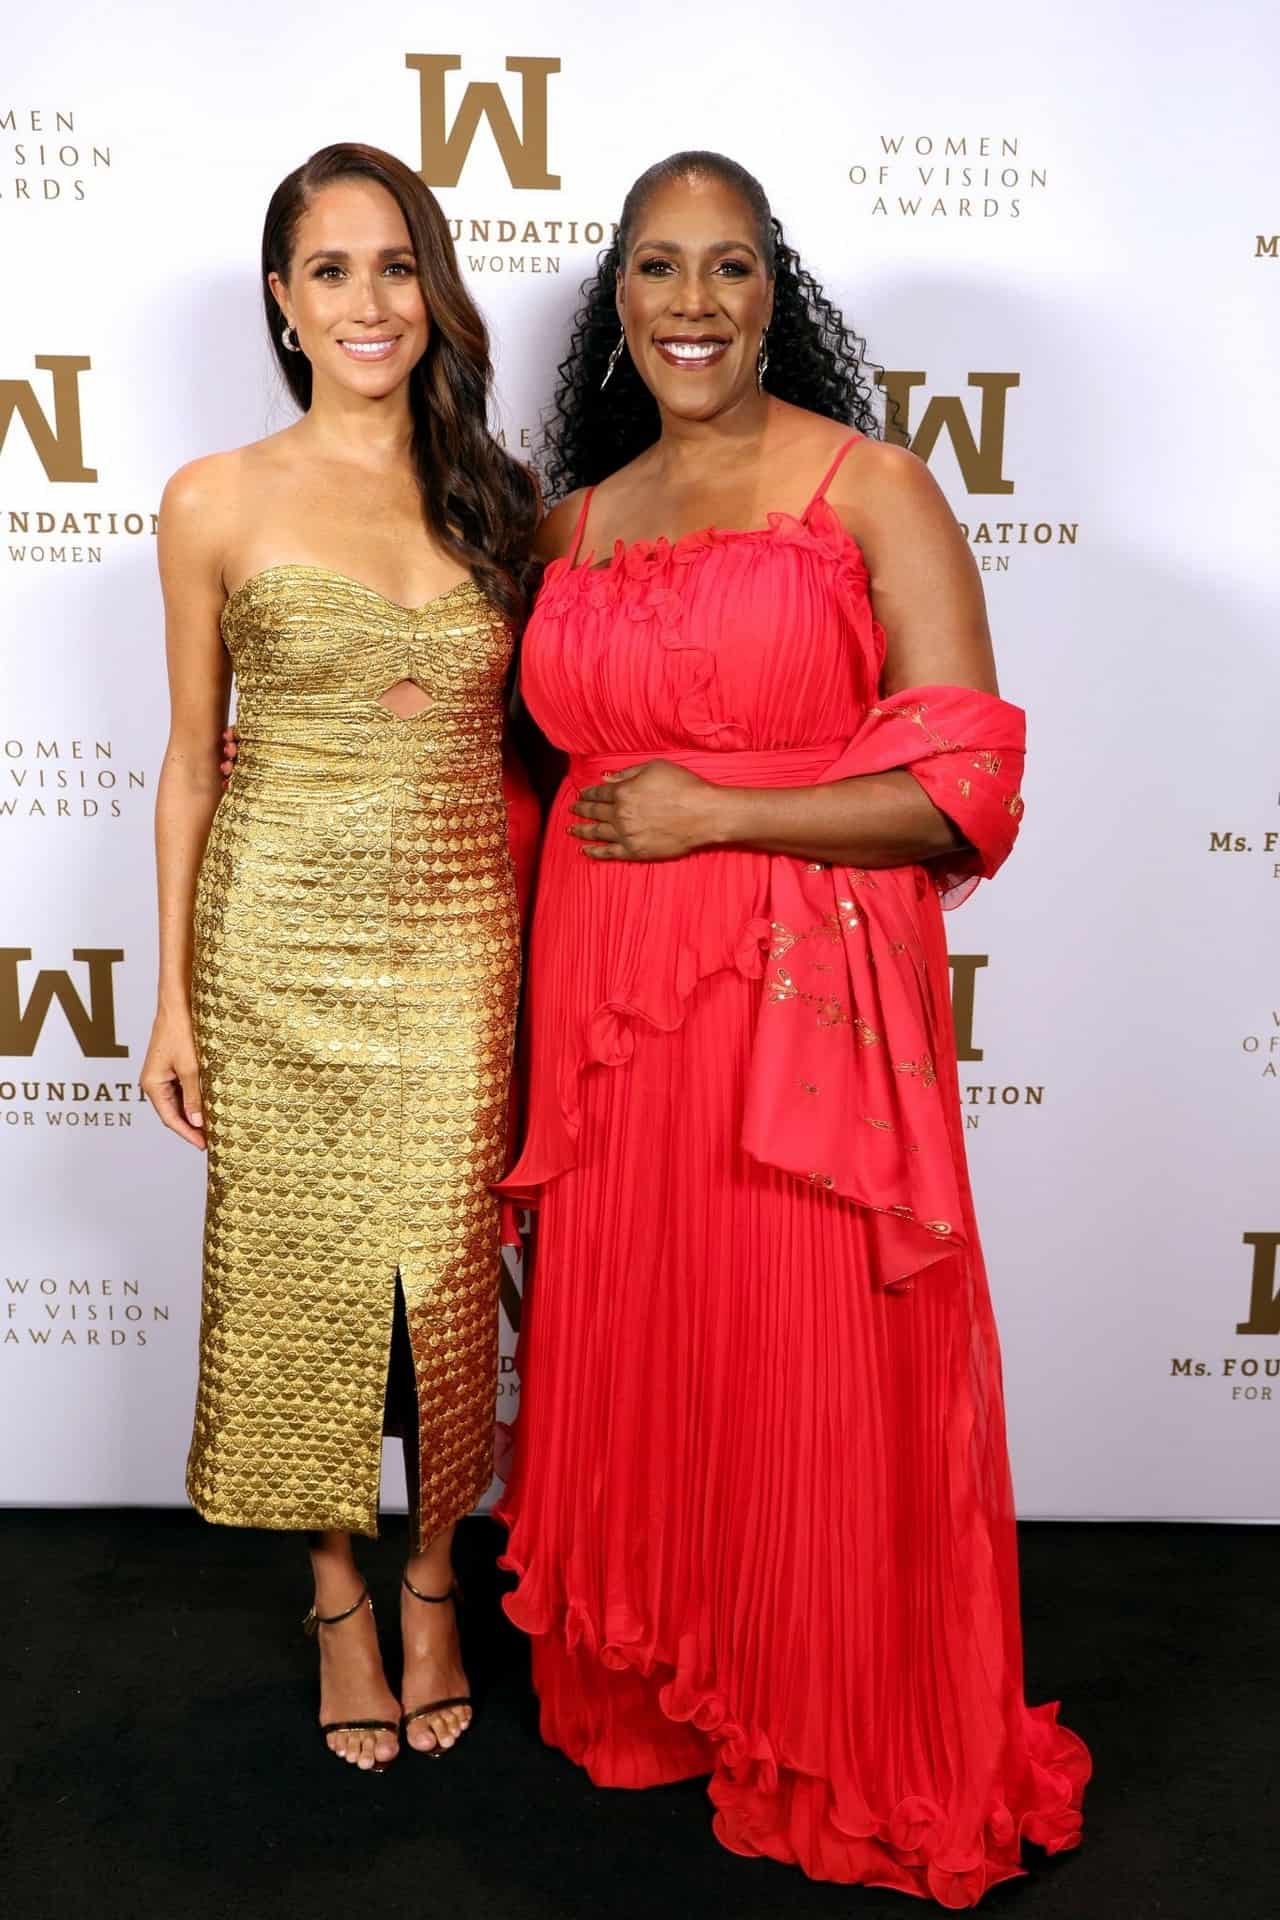 Meghan Markle Dazzles in Gold Dress at the 2023 Women of Vision Awards